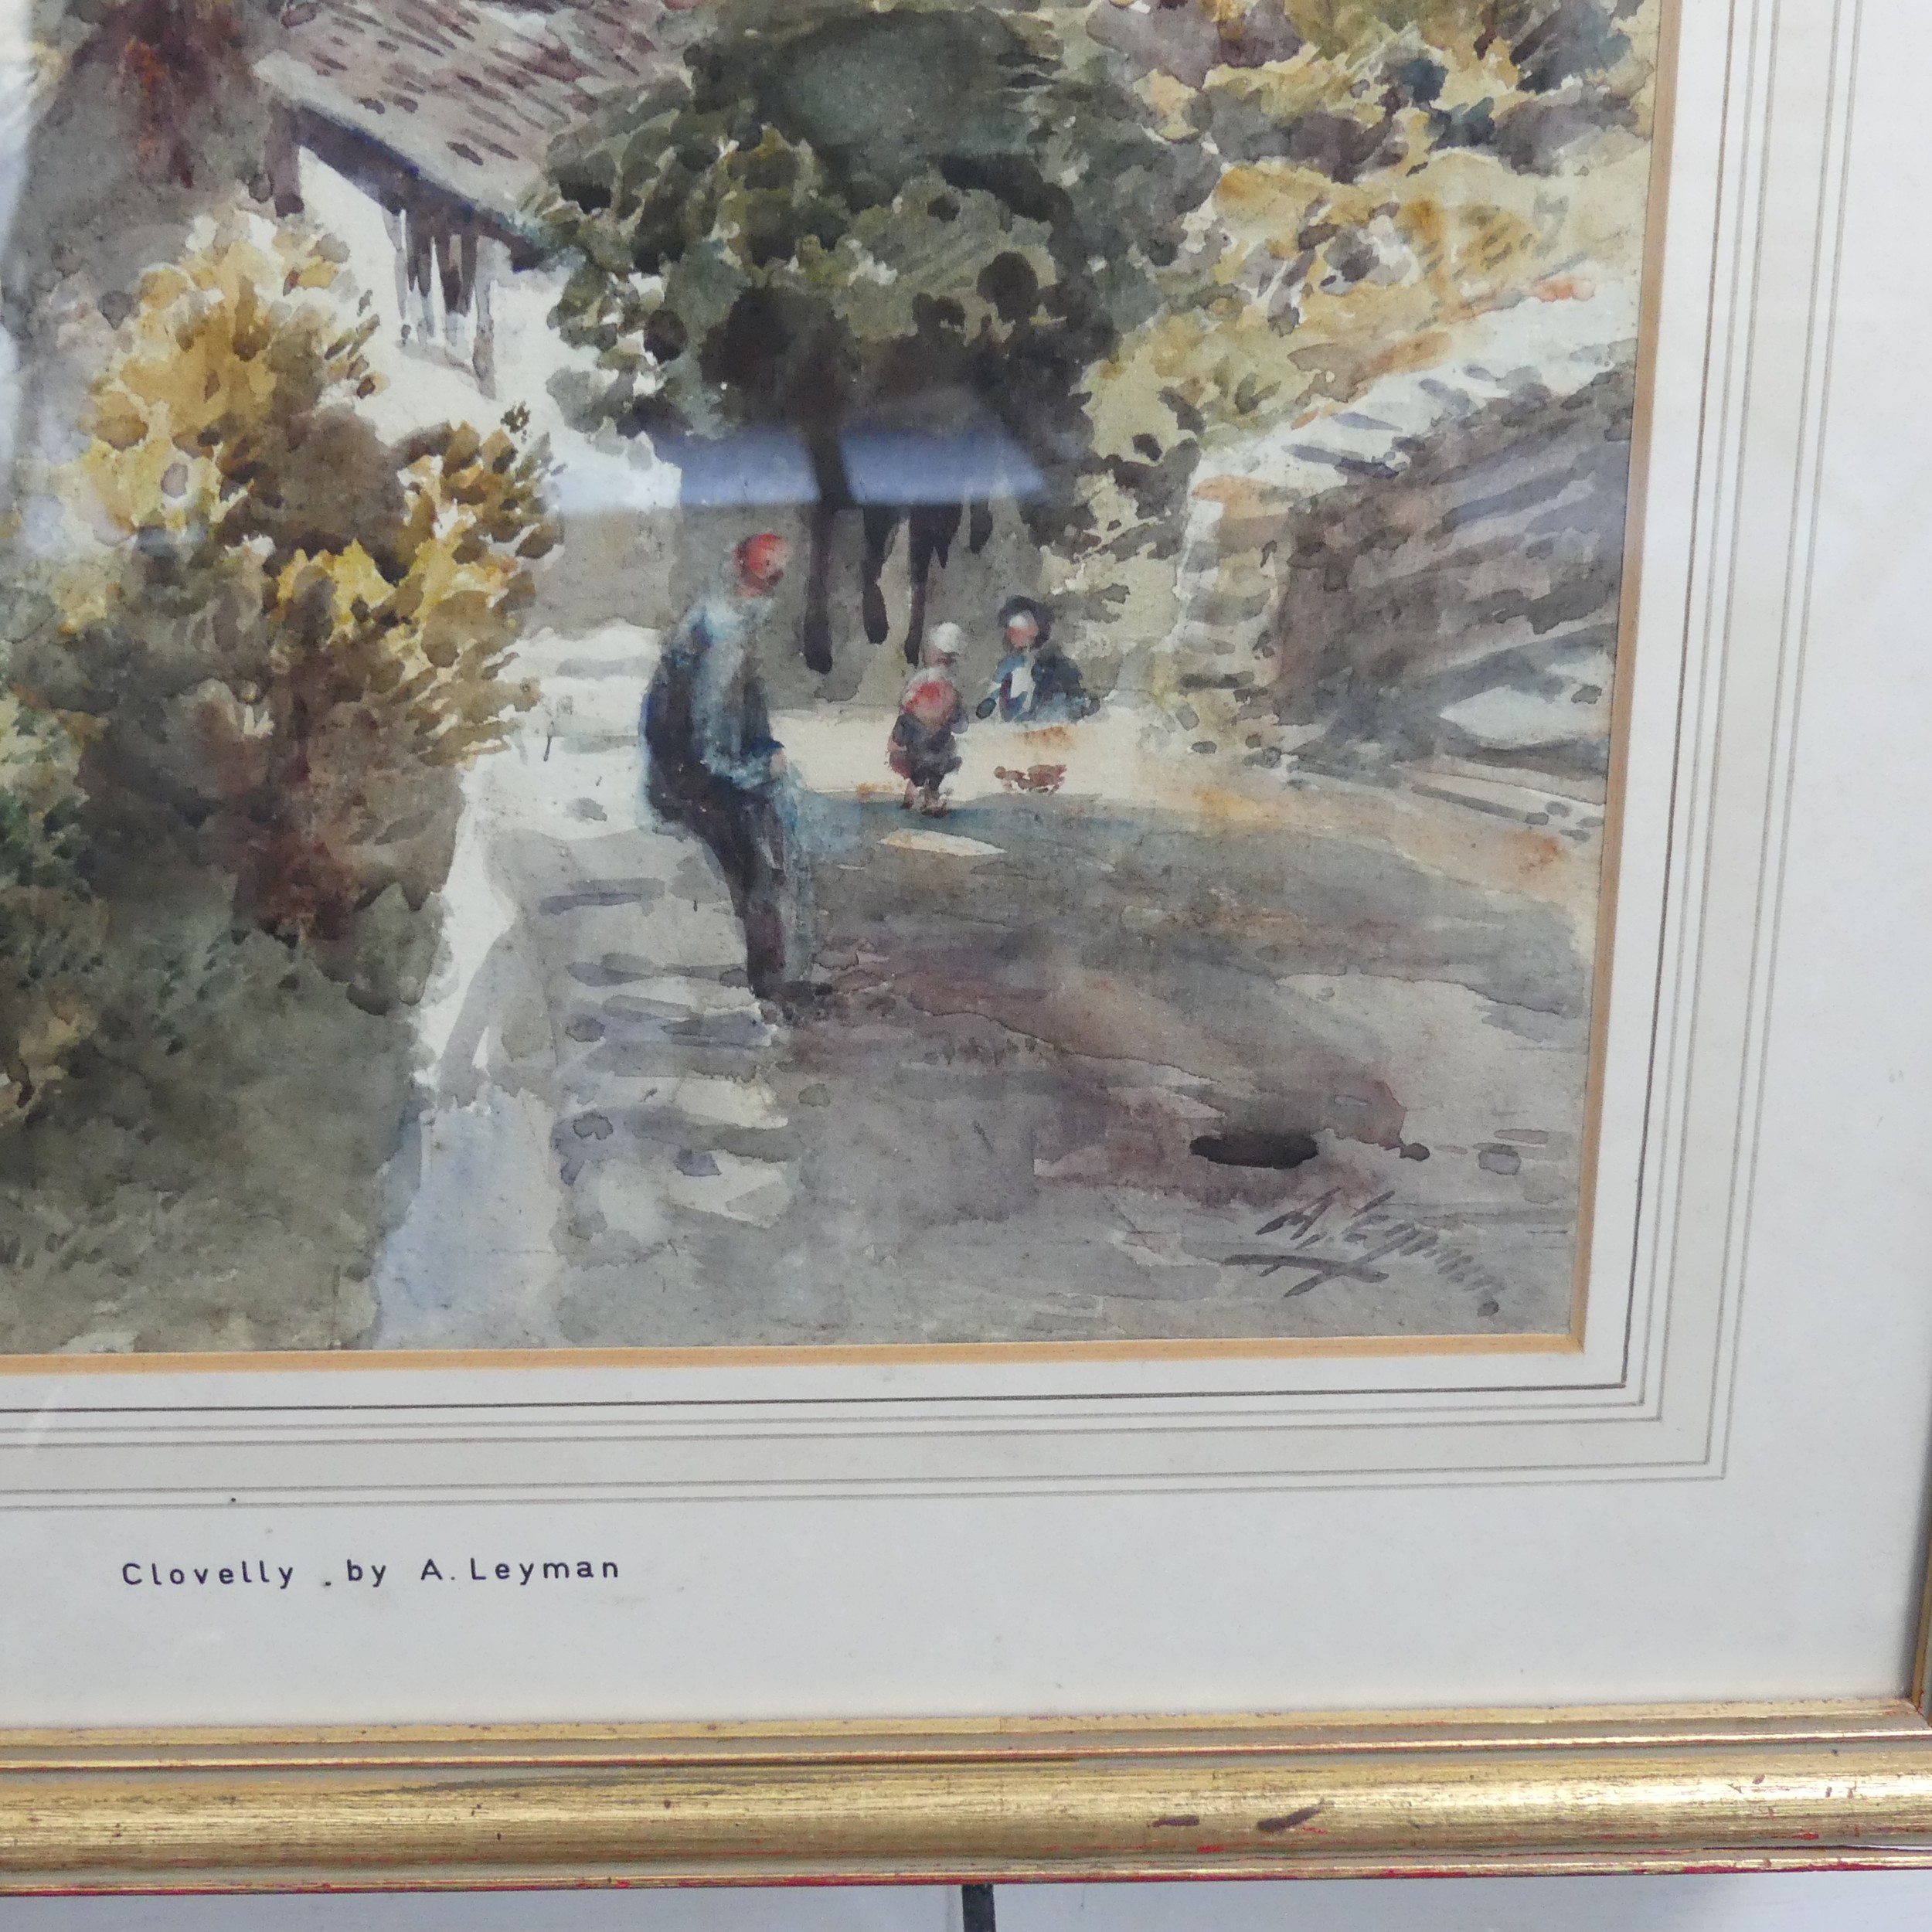 Alfred Leyman (British, 1856-1933), Clovelly, watercolour, signed lower right, 54cm x 37cm, framed - Image 3 of 4